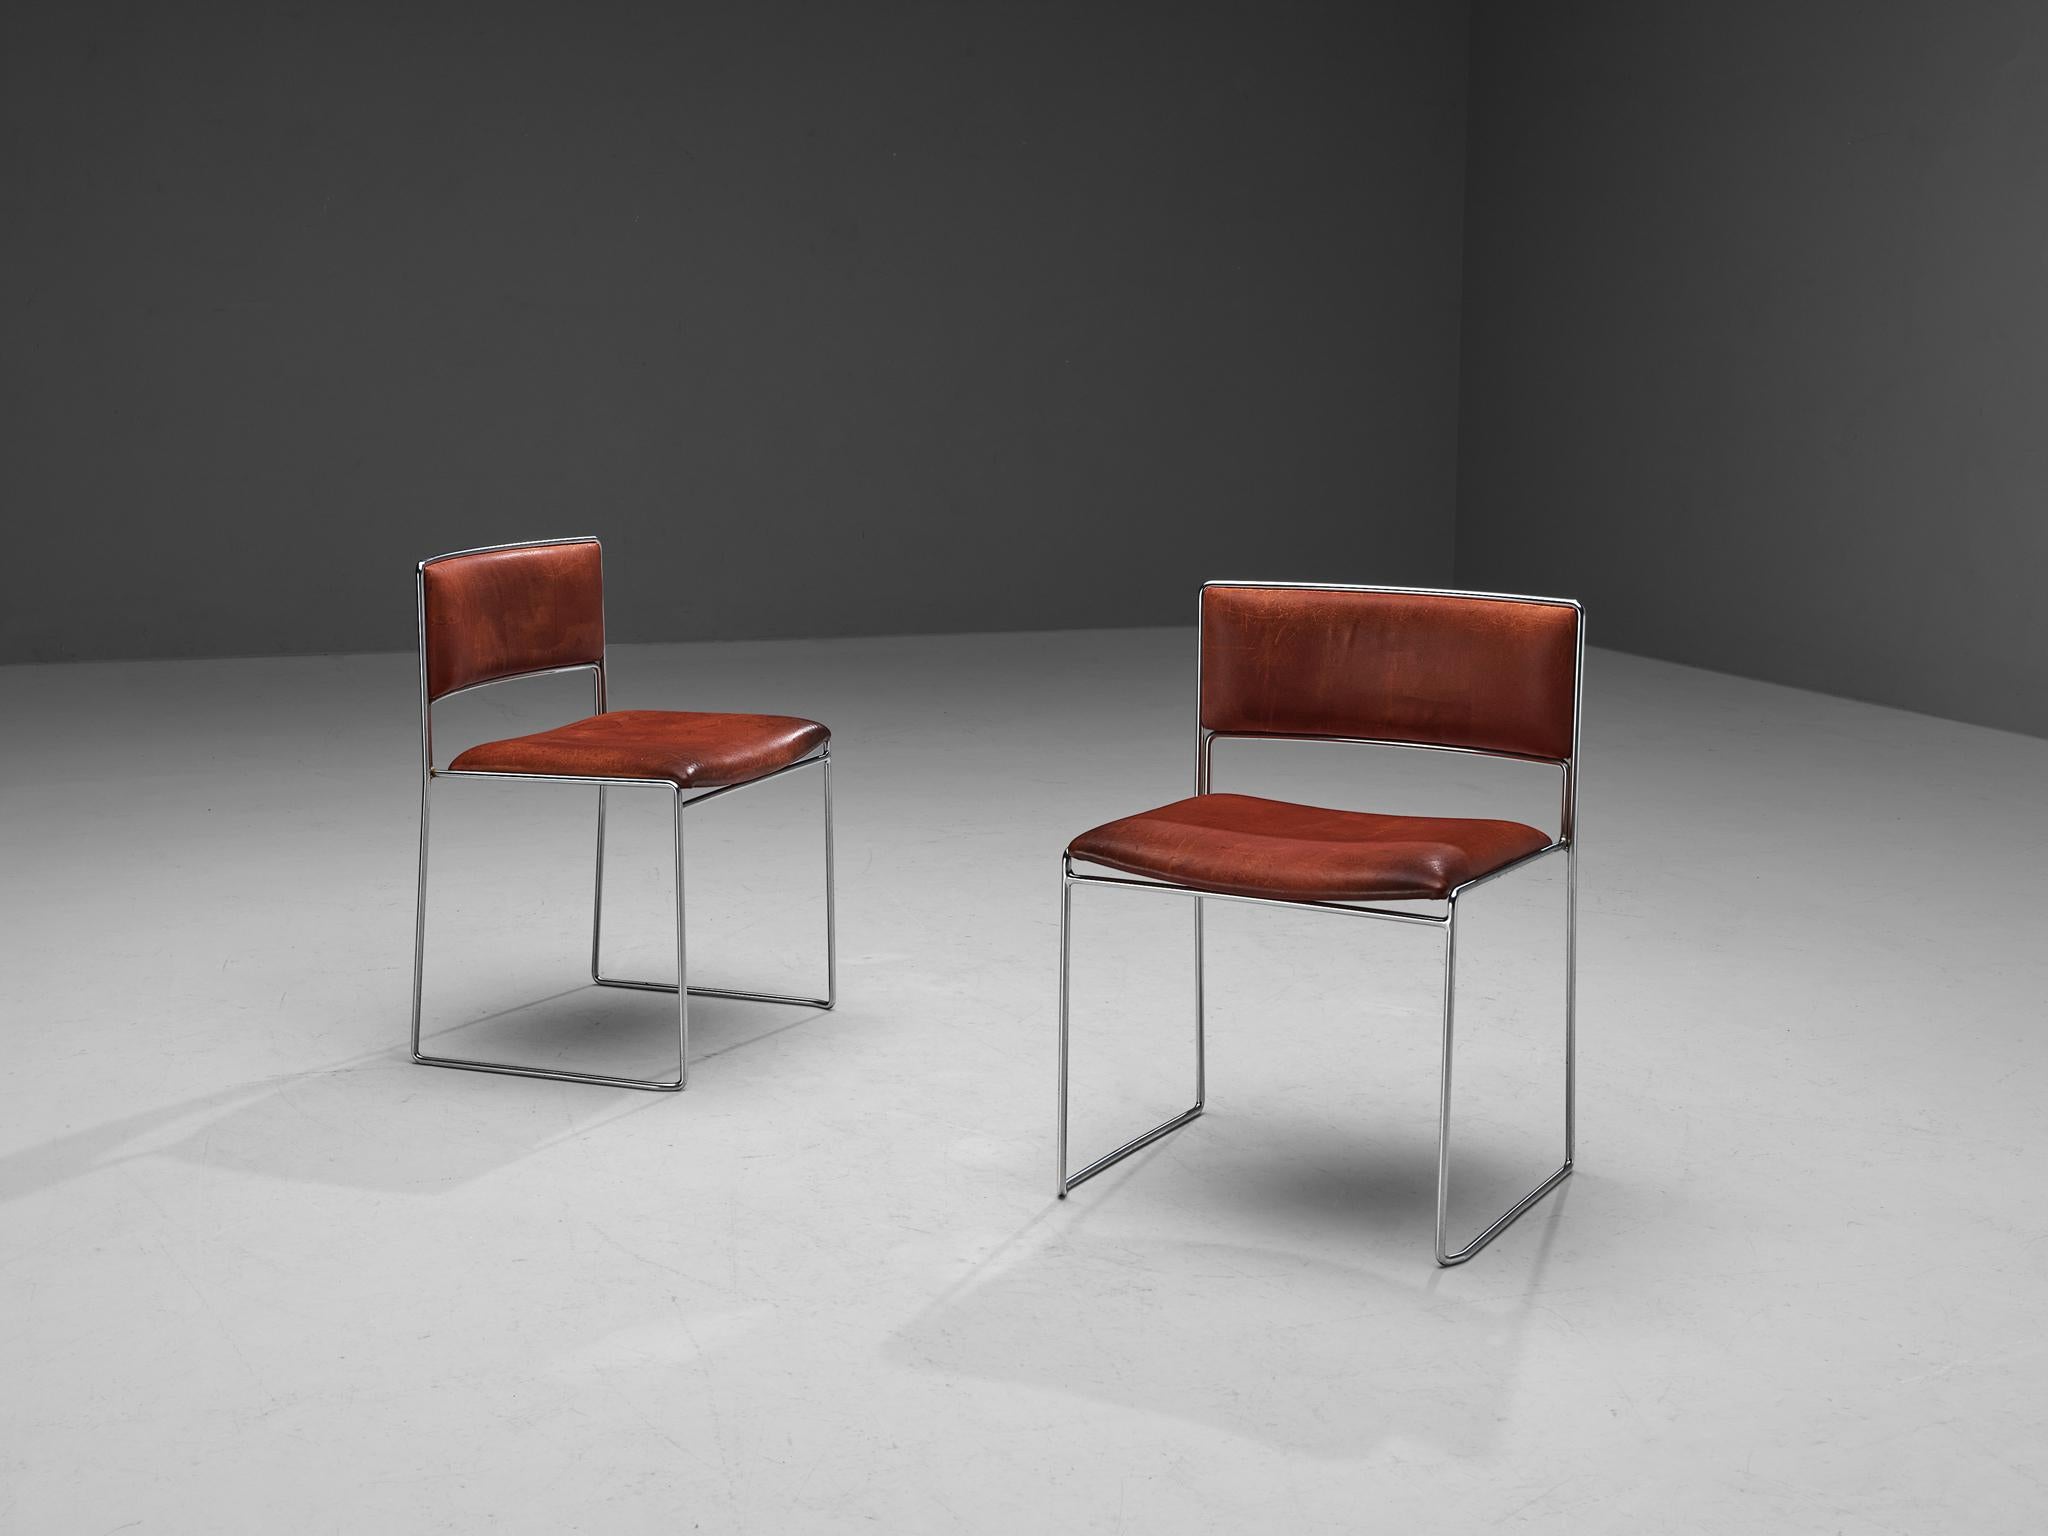 Preben Fabricius & Jørgen Kastholm for Kill international, pair of dining chairs, leather, chrome-plated metal, Germany, 1960s. 

Pair of stylish dining chairs designed by Preben Fabricius & Jørgen Kastholm in the 1960s. A striking combination of